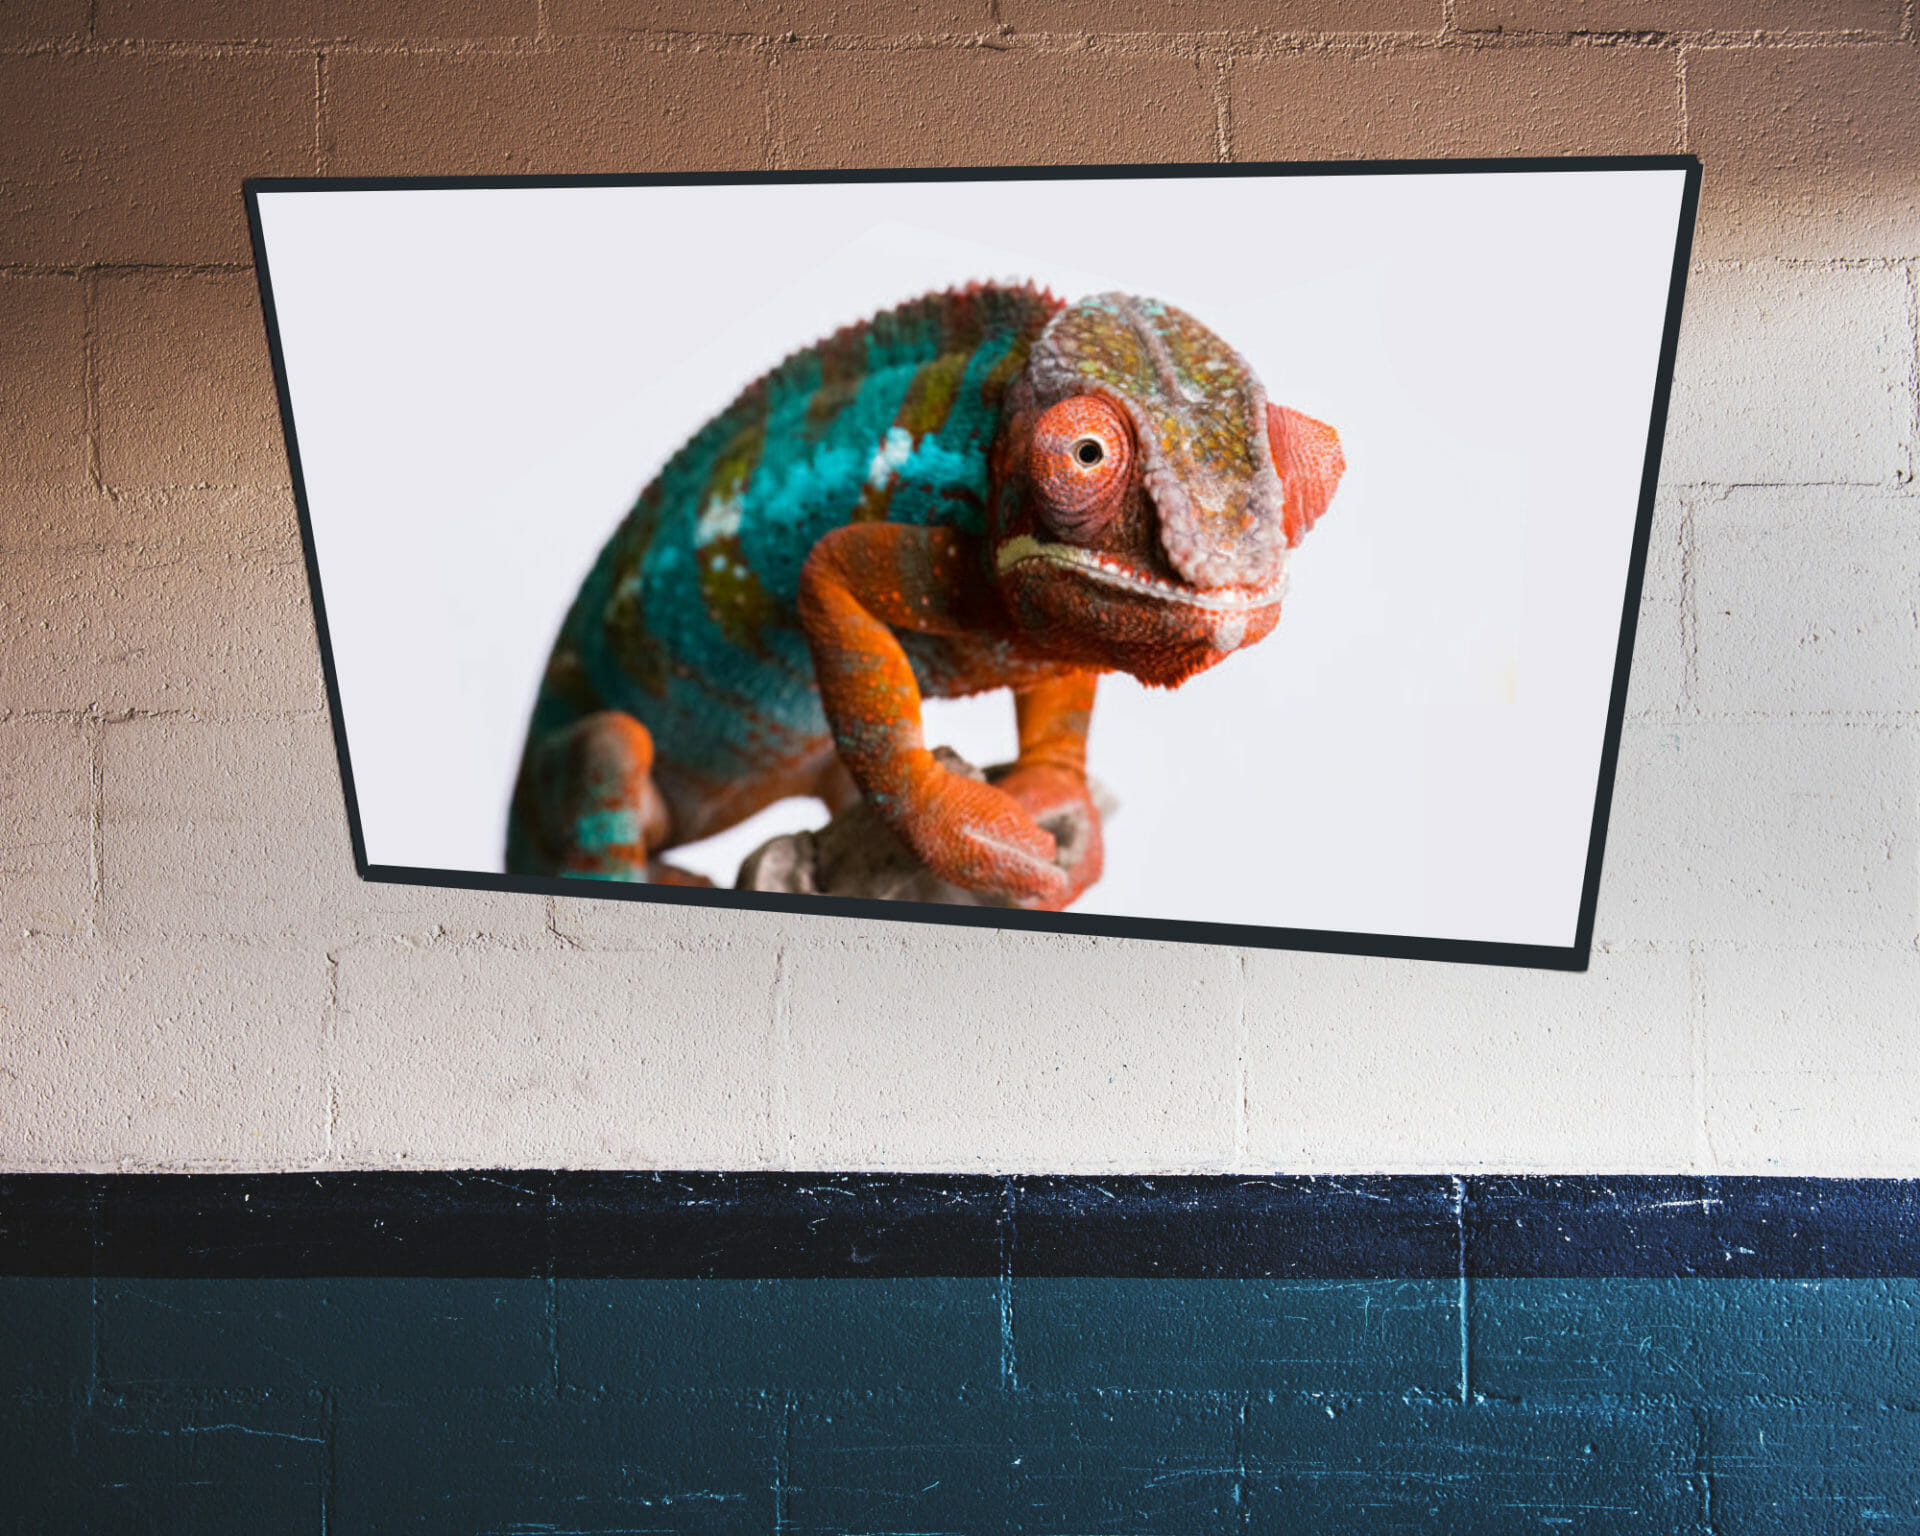 cameleon image on the TV screen